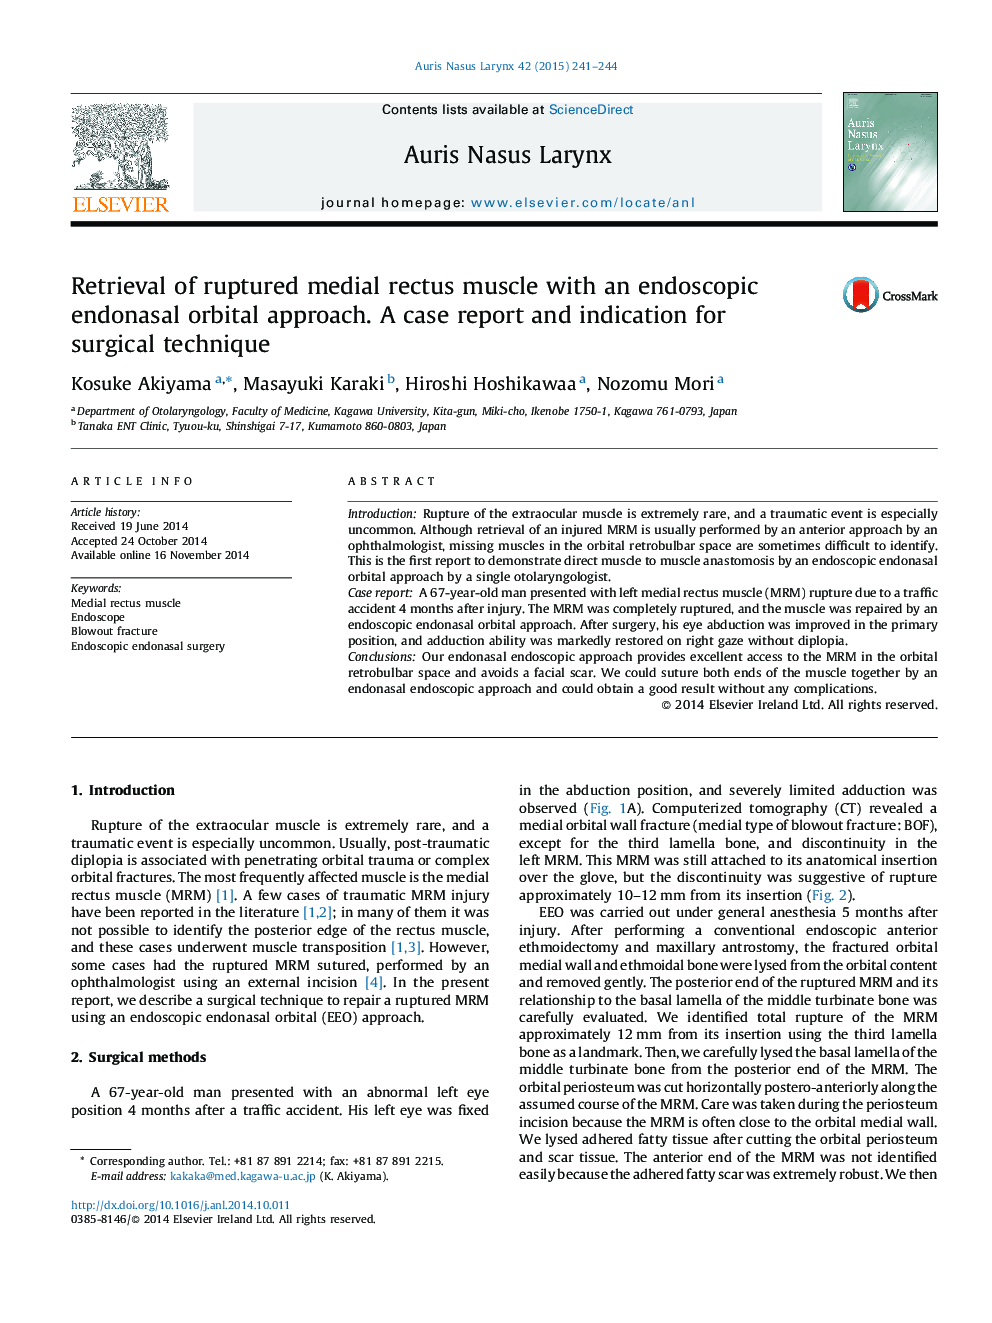 Retrieval of ruptured medial rectus muscle with an endoscopic endonasal orbital approach. A case report and indication for surgical technique